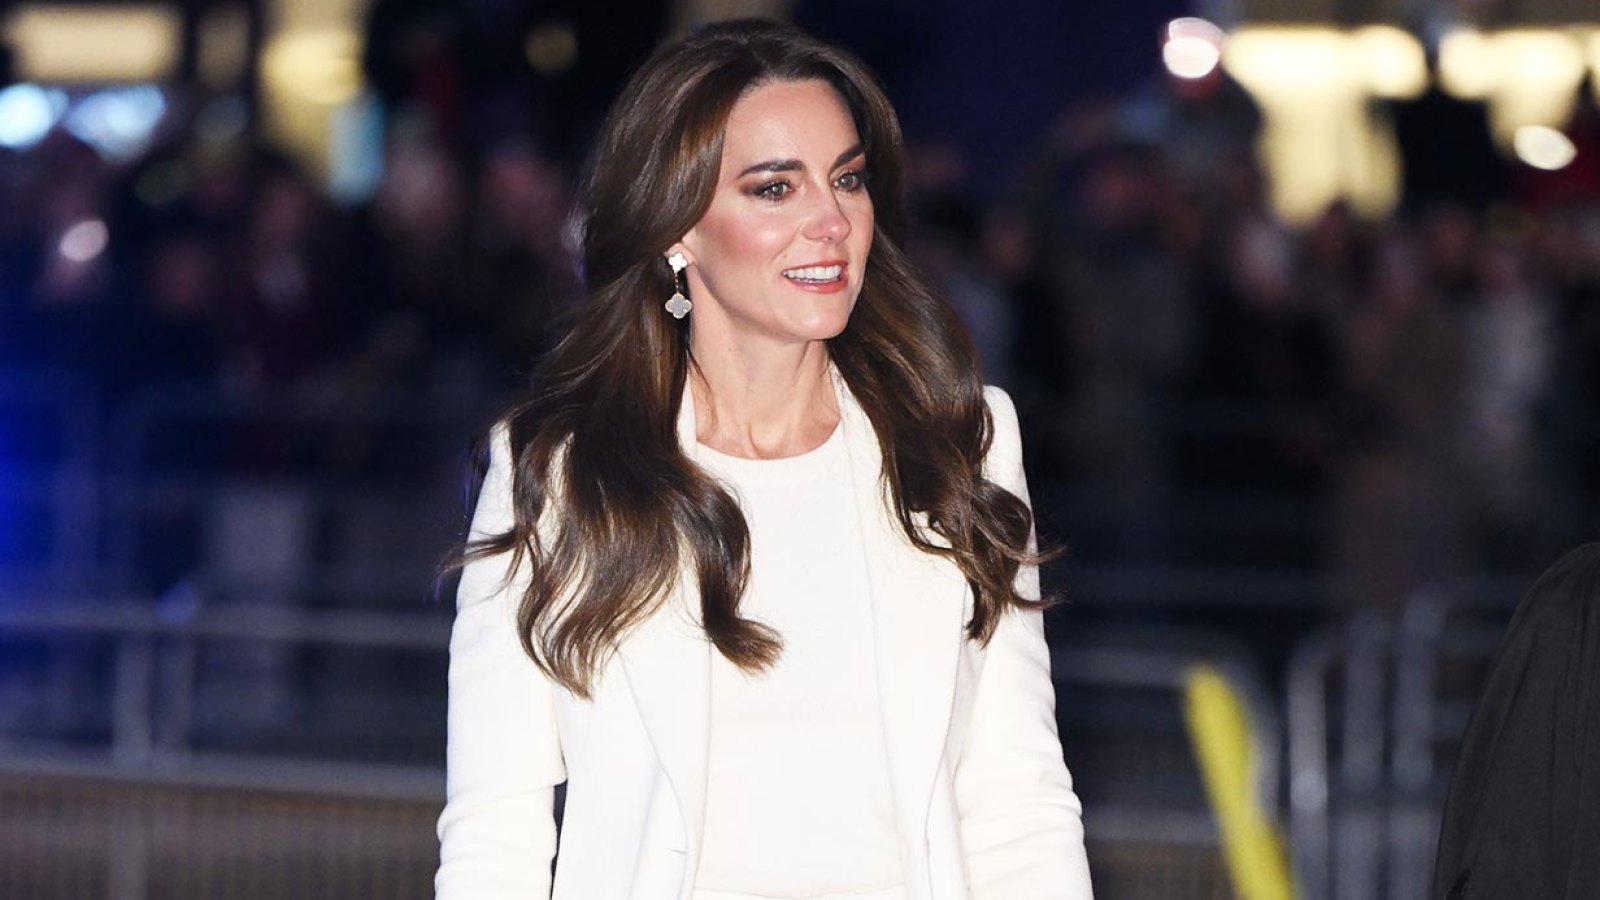 Kate Middleton Shares Emotional Christmas Message About Reflecting On New Beginnings